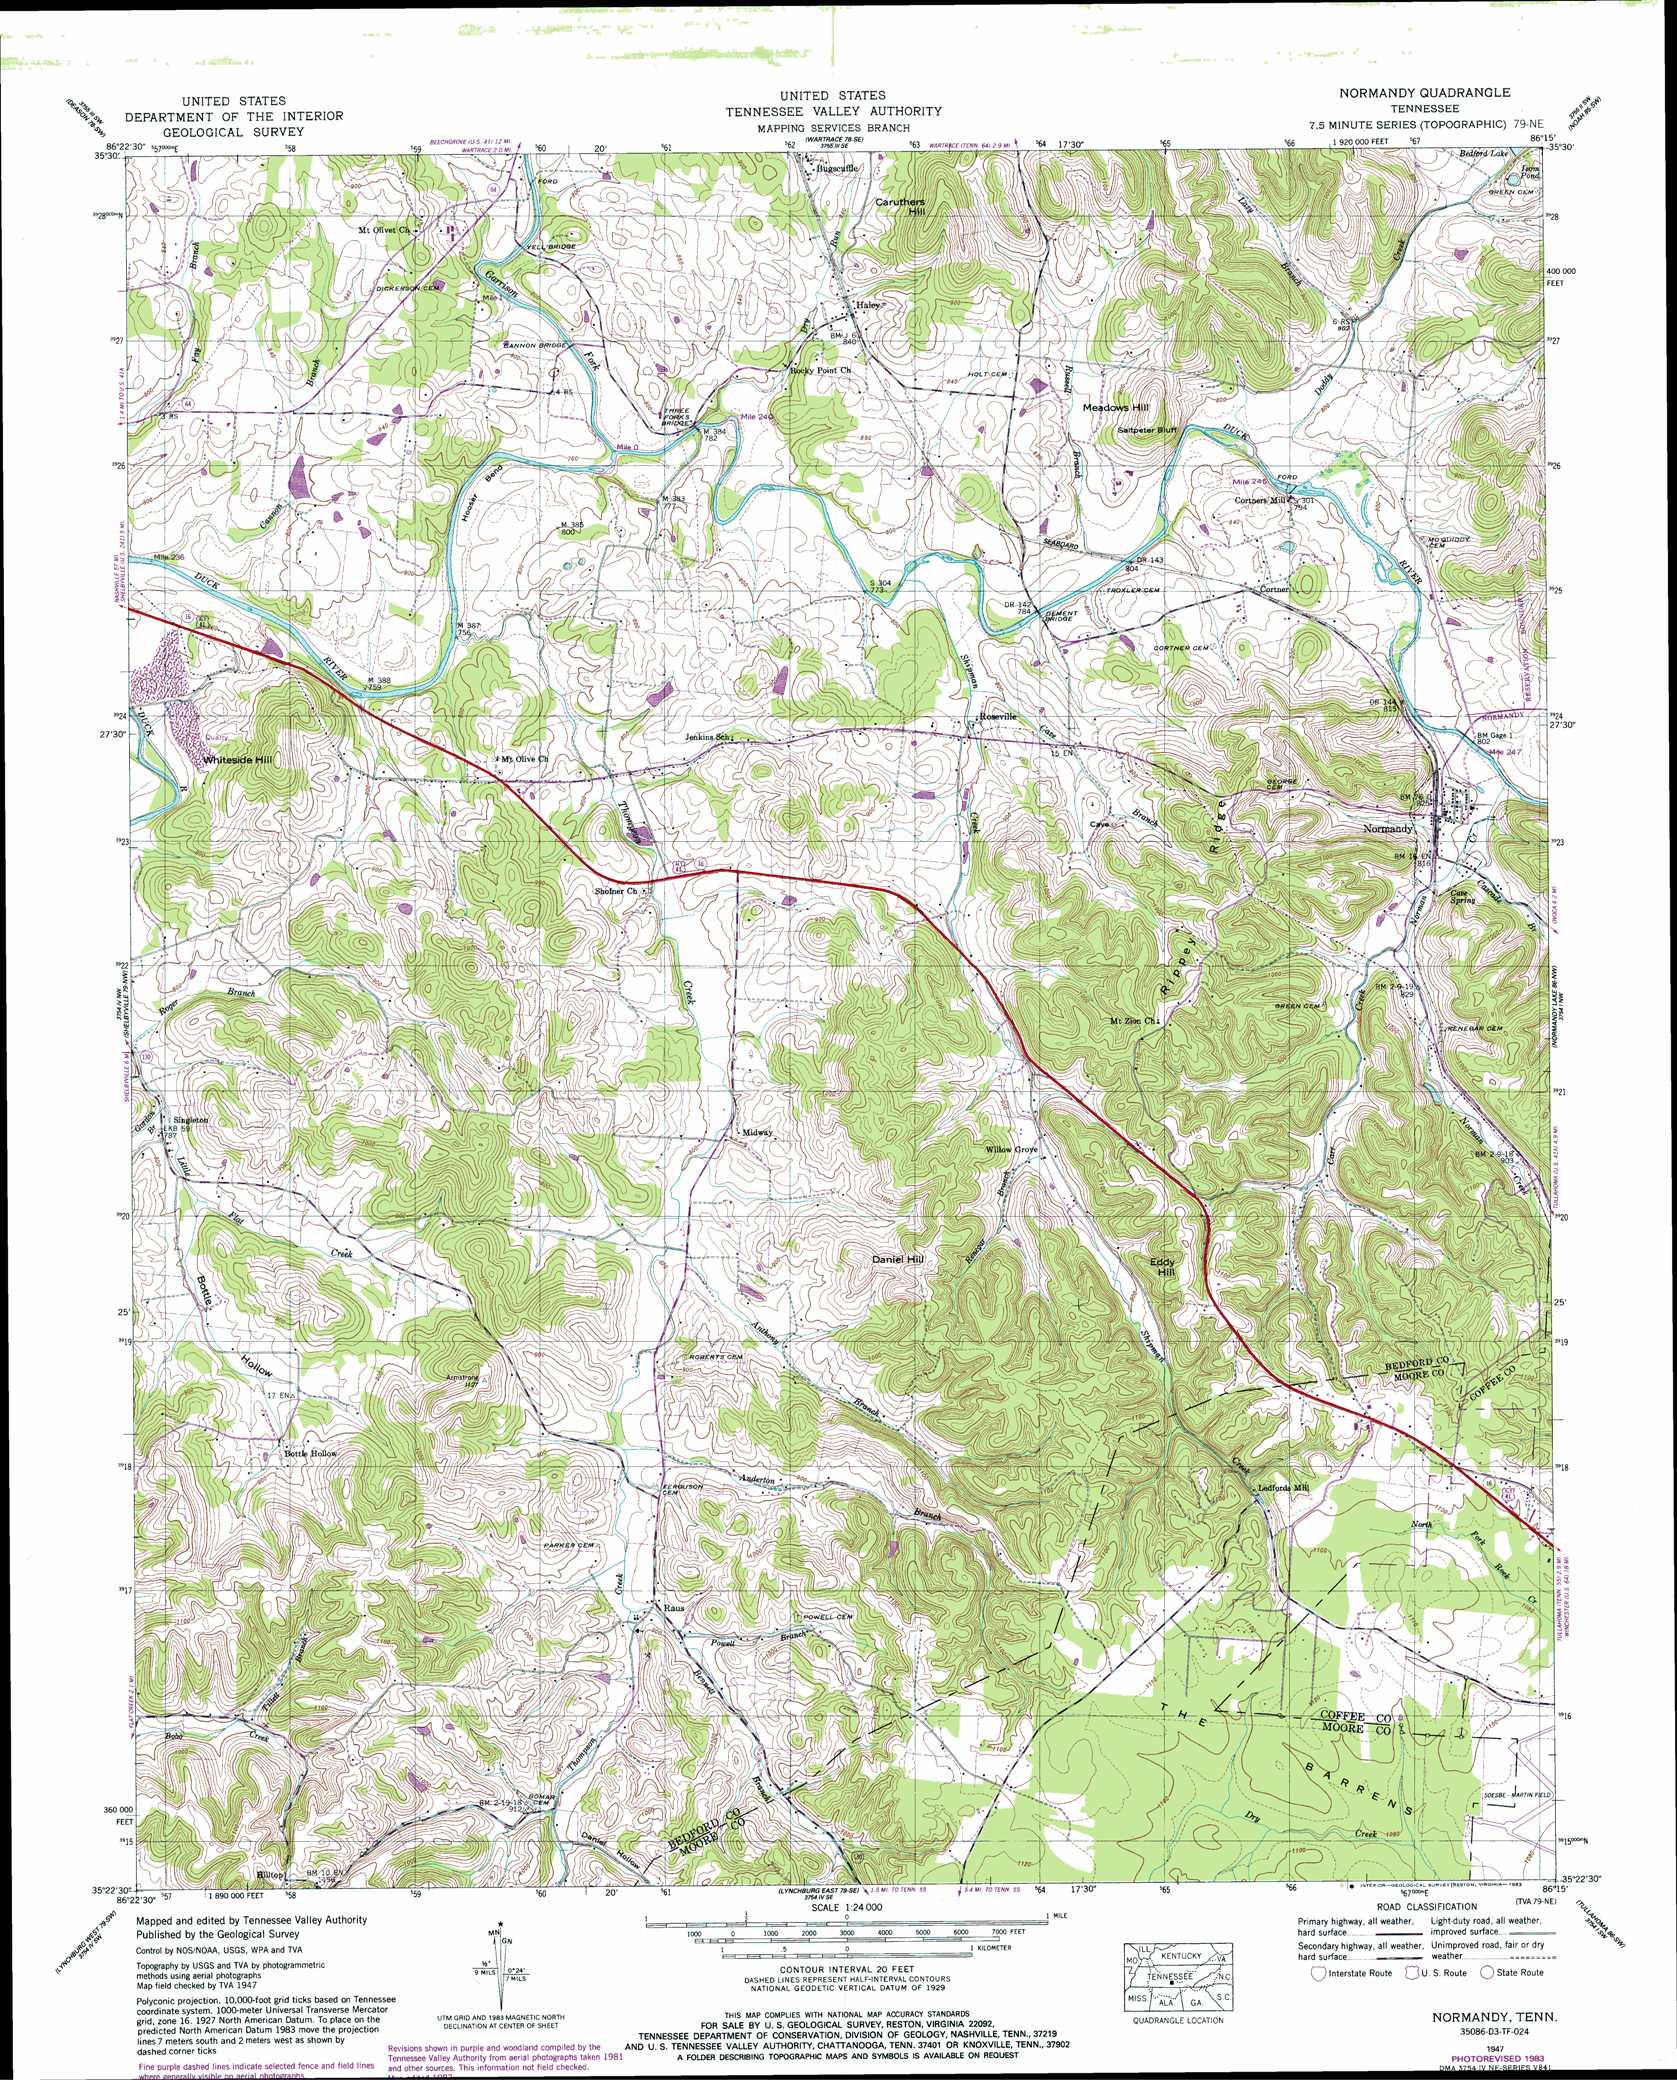 PDF Digital Vegetation Maps For The Great Smoky Mountains